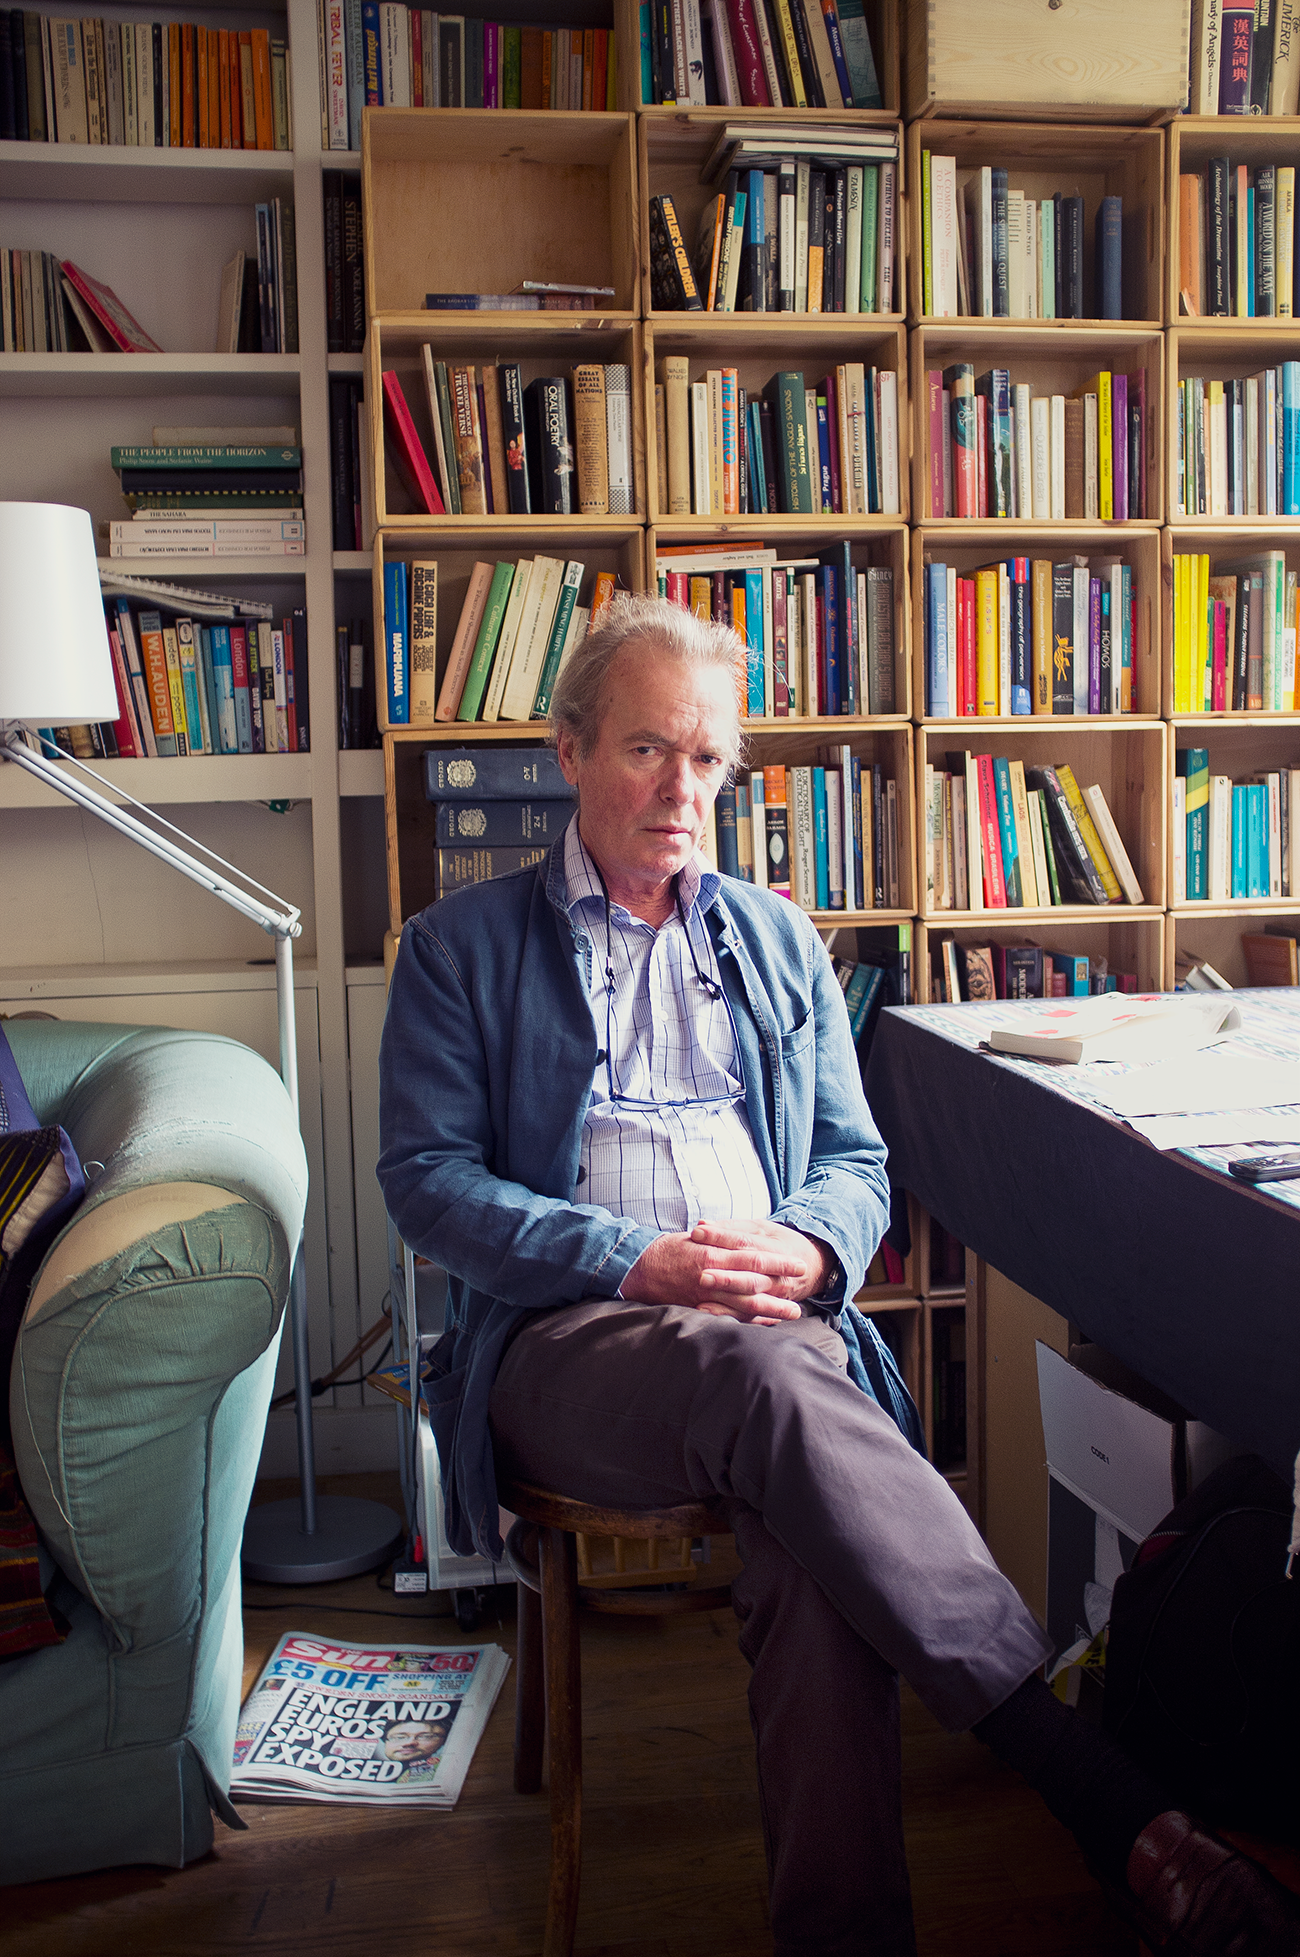 What Ive Learned Martin Amis image pic